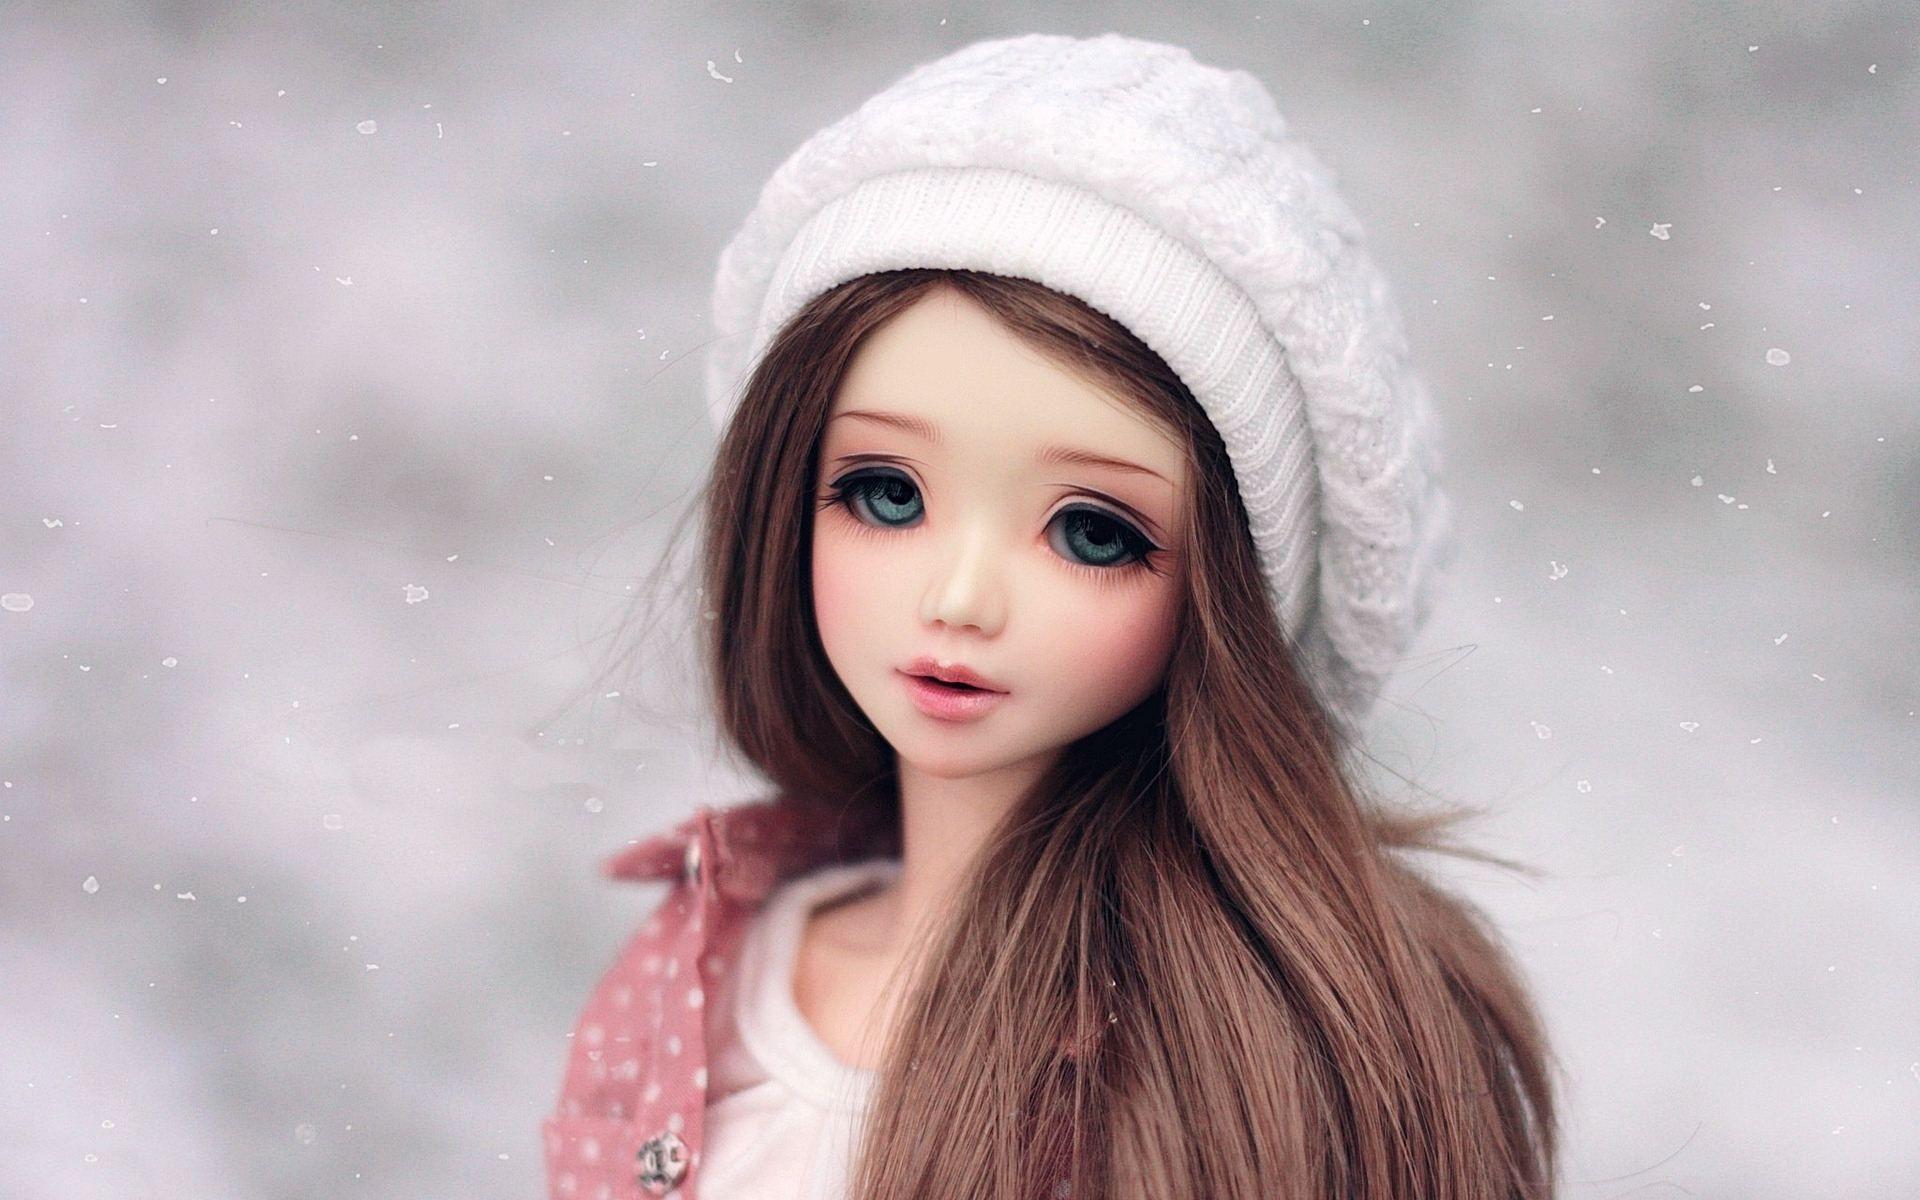 Most Stylish and Beautiful Barbie Doll Image and Status